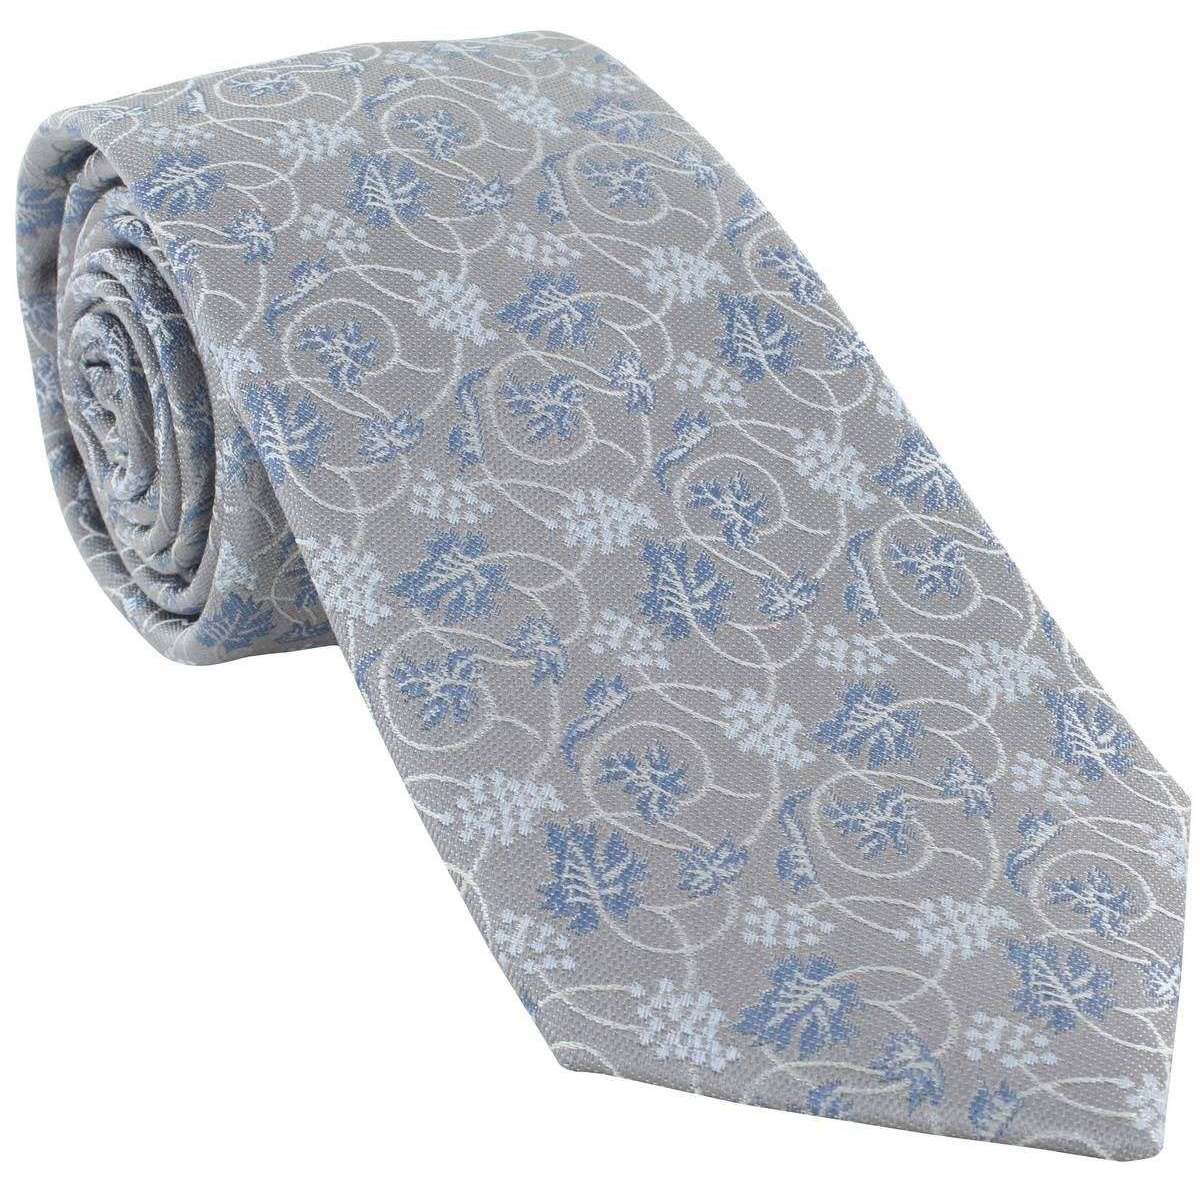 Michelsons of London Trailing Vine Floral Silk Tie - Silver/Blue